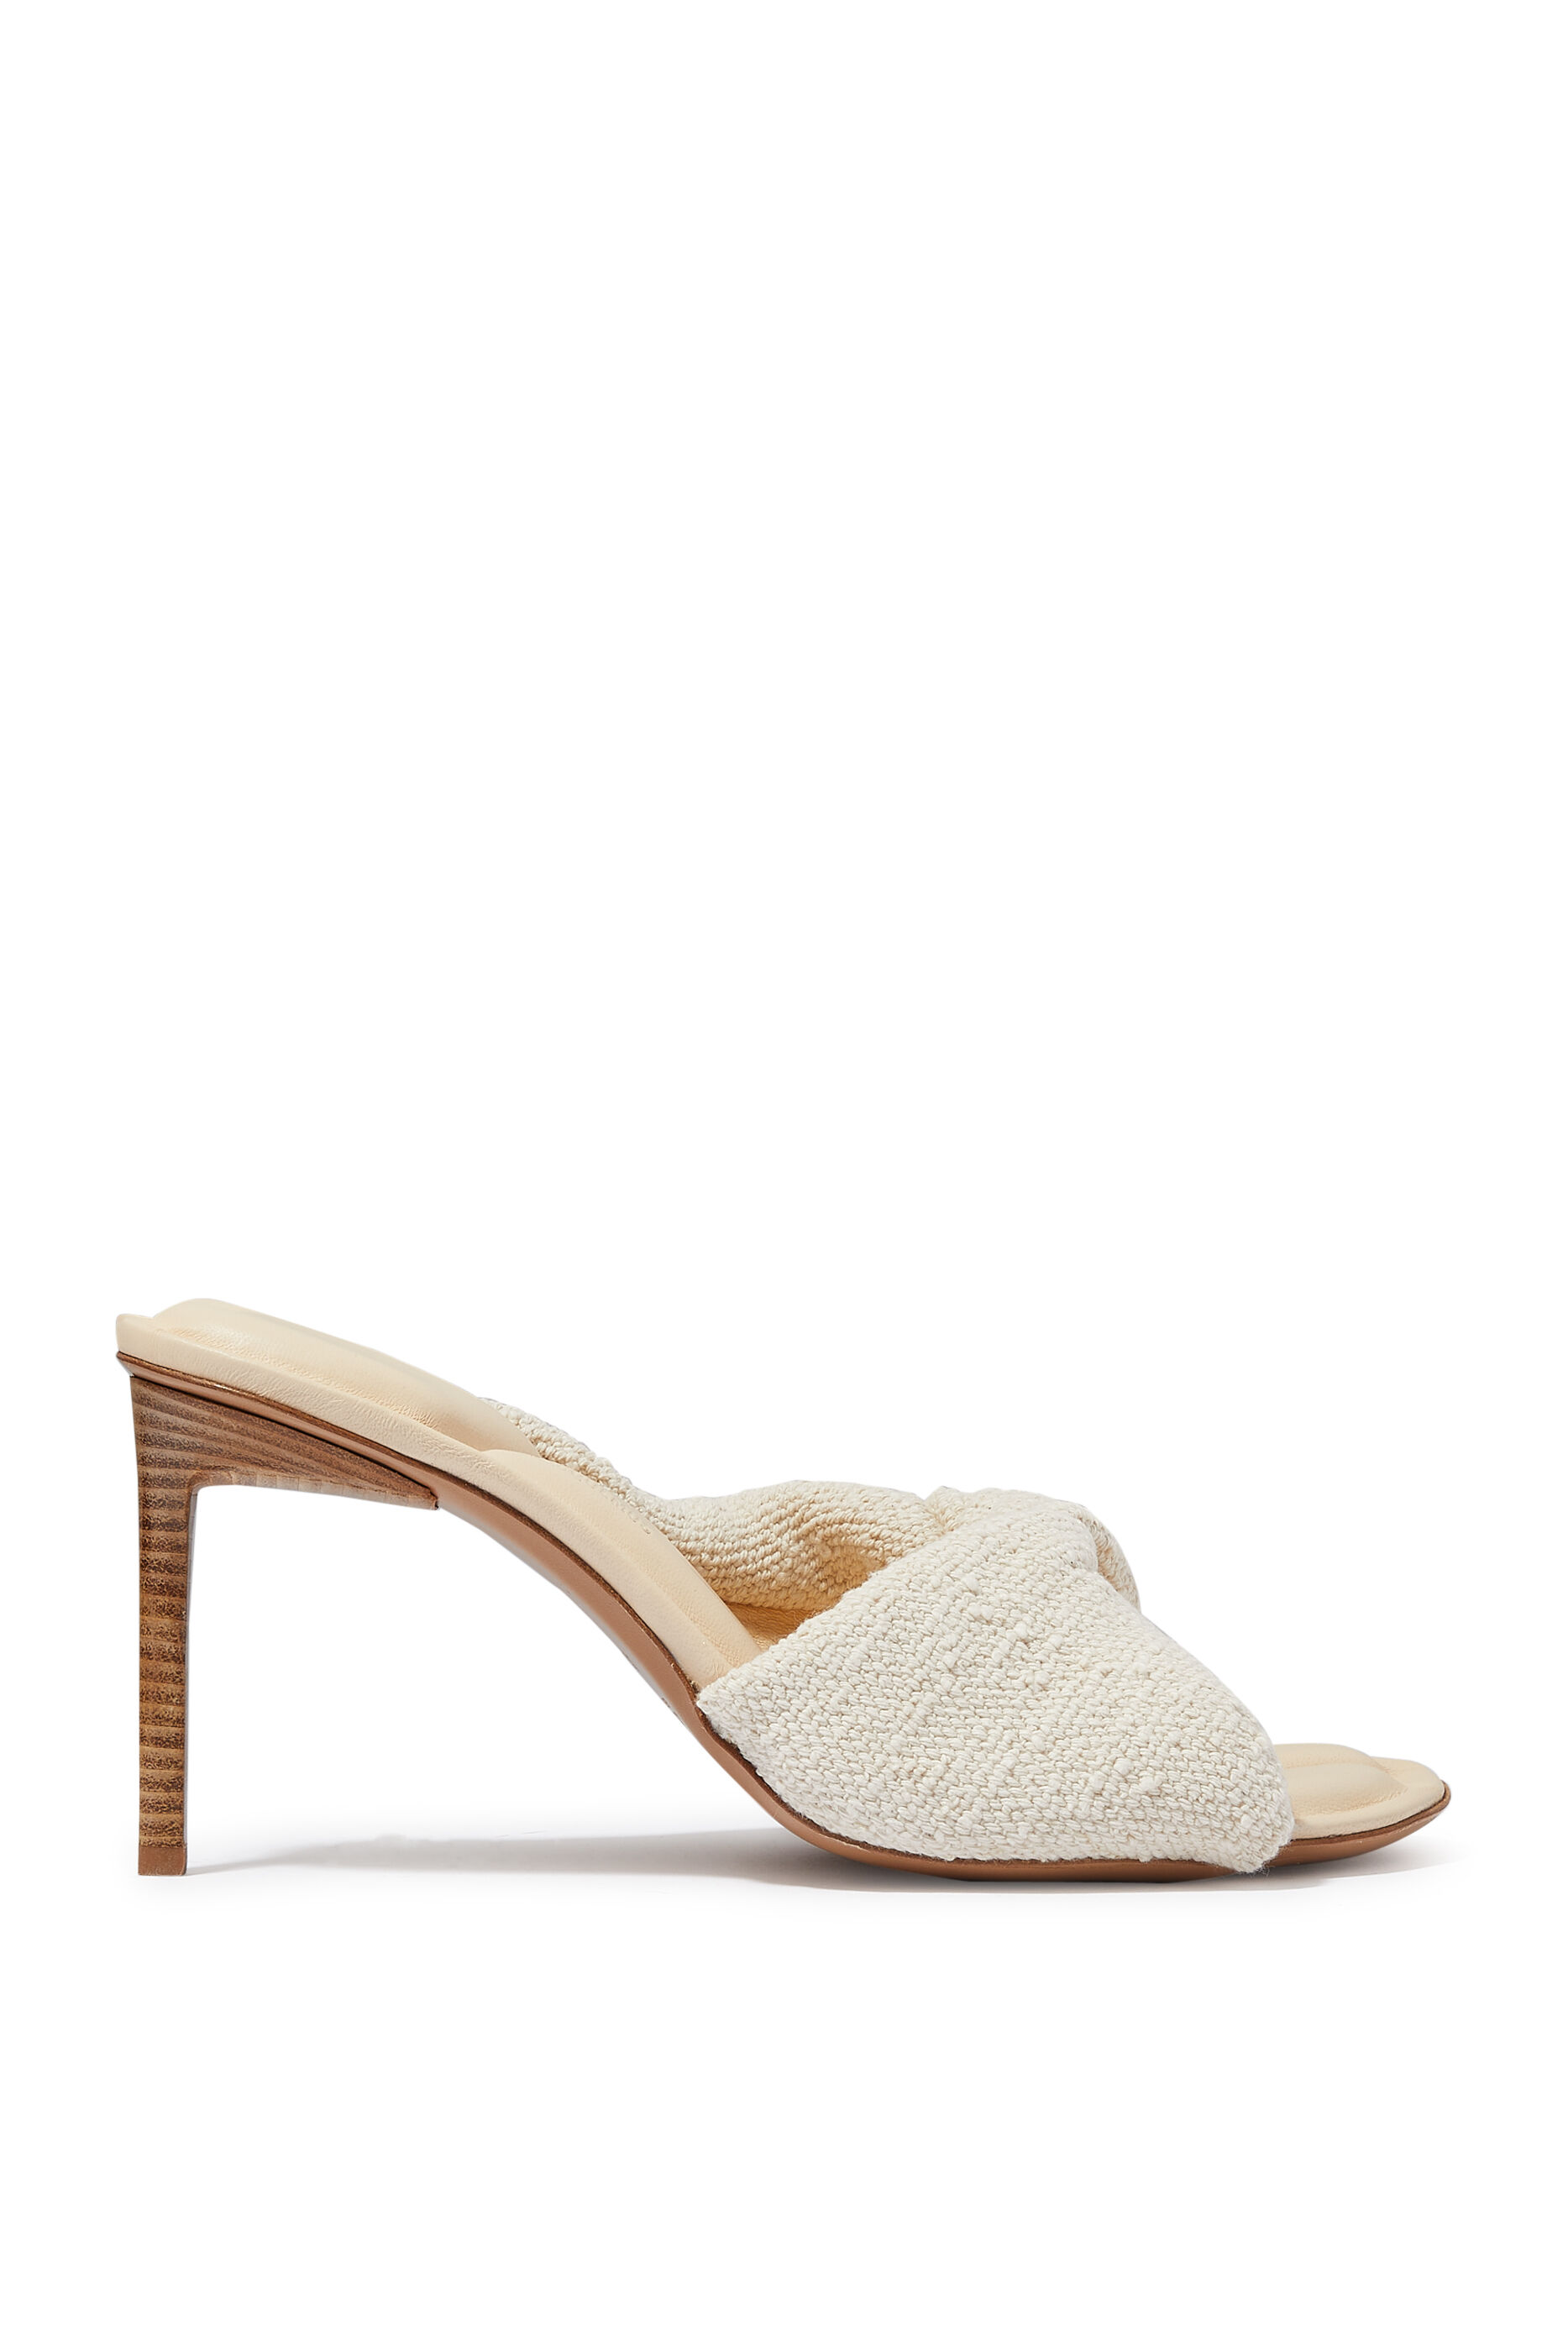 Womens Shoes Heels Mule shoes Jacquemus Leather bagnu Mules in Cream White 